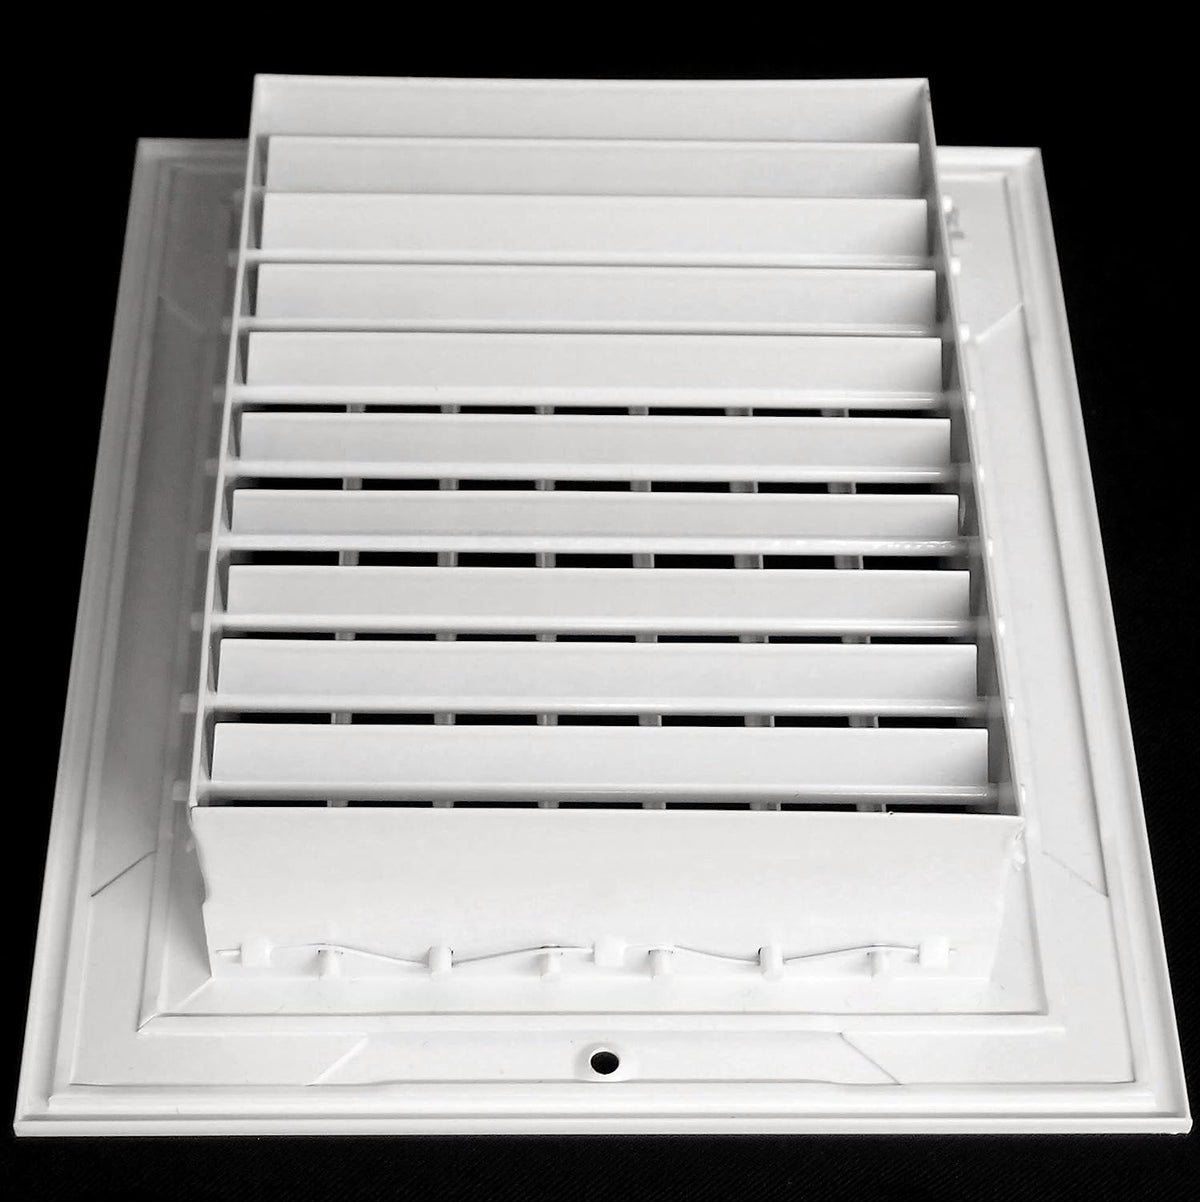 14&quot;w X 6&quot;h Aluminum Double Deflection Adjustable Air Supply HVAC Diffuser - Full Control Vertical/Horizontal Airflow Direction